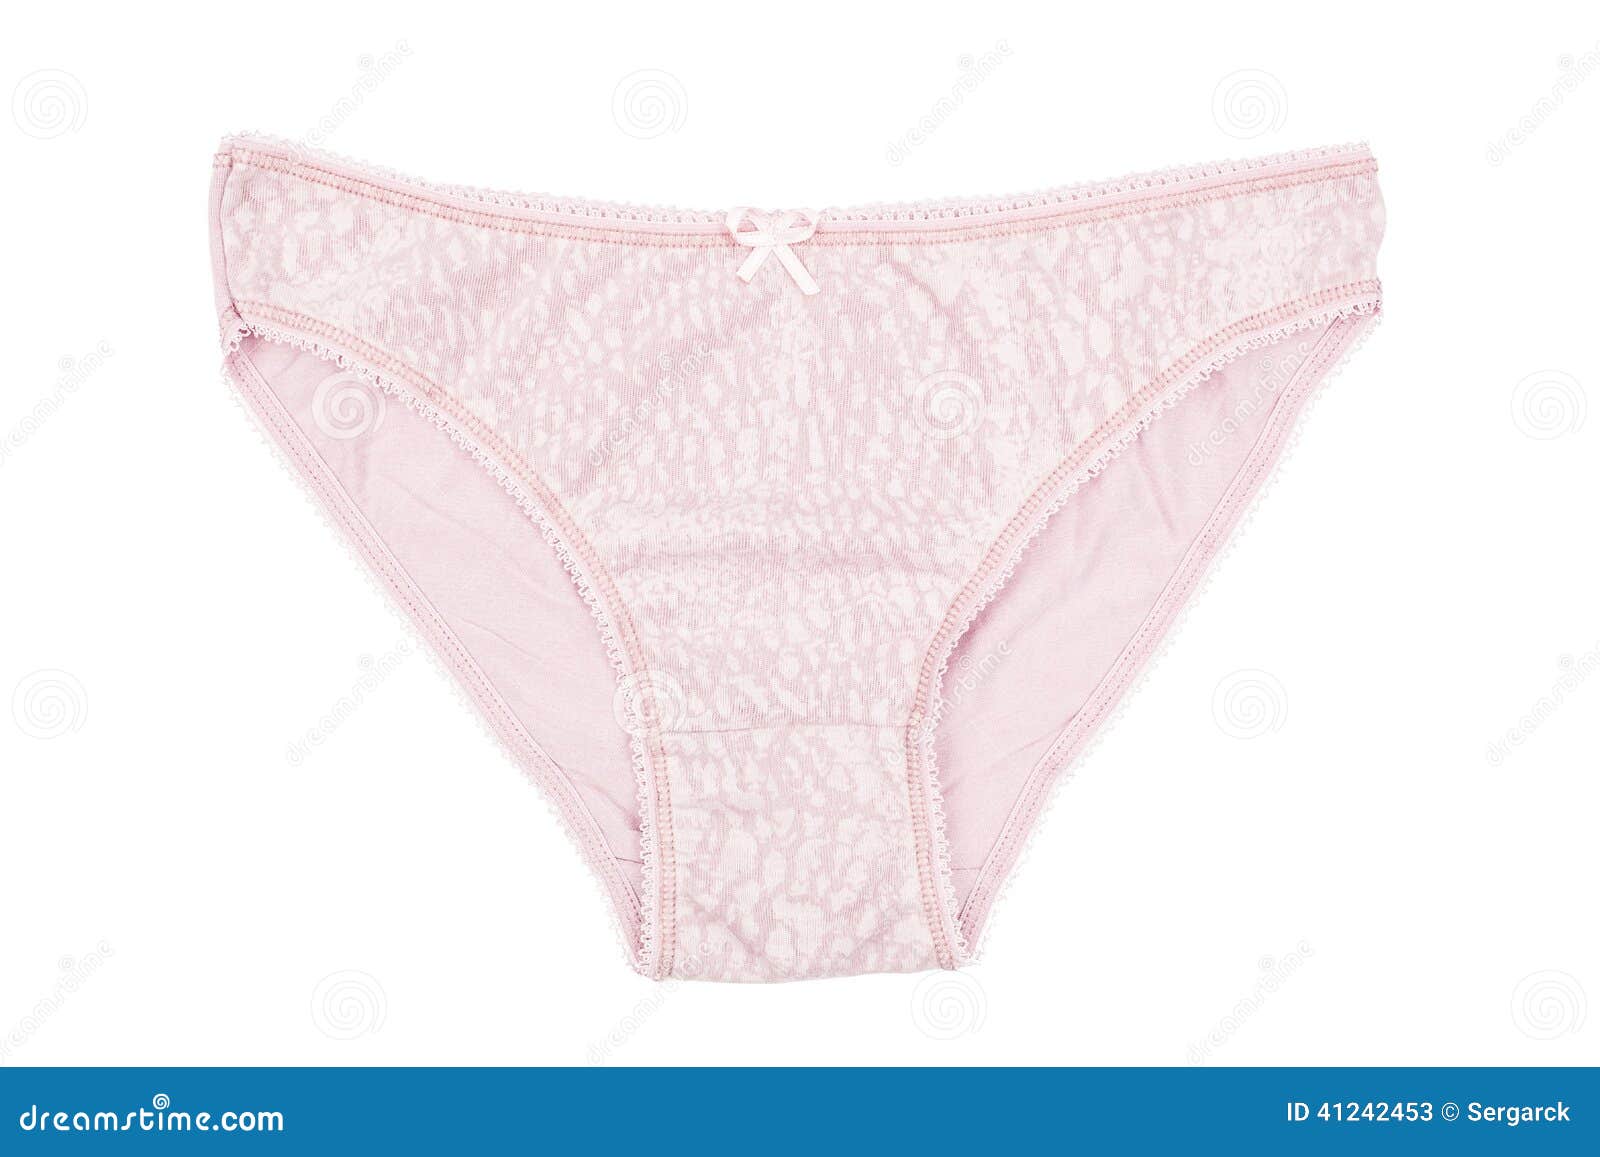 A Women S Cotton Panties Pink With Lace Stock Image Image 41242453